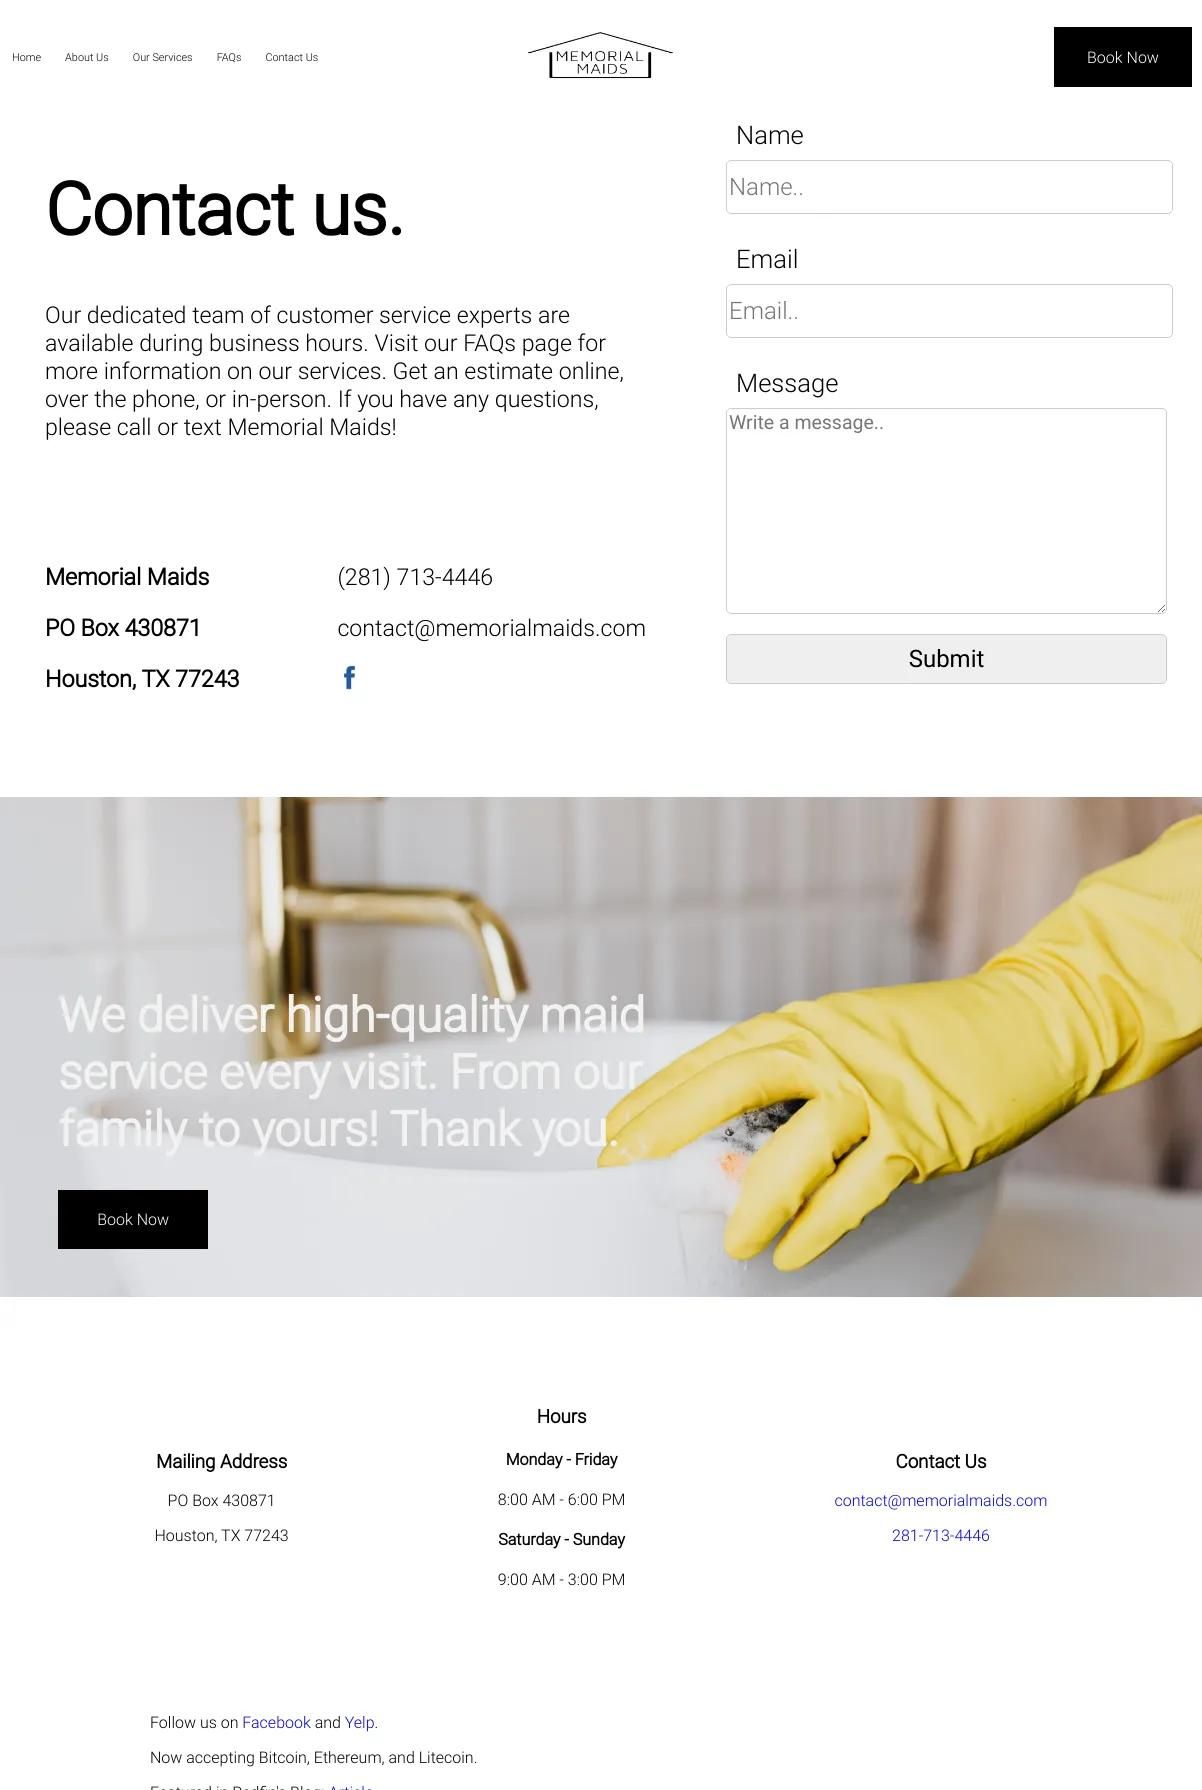 Screenshot 3 of Memorial Maids (Example Squarespace Cleaning Services Website)